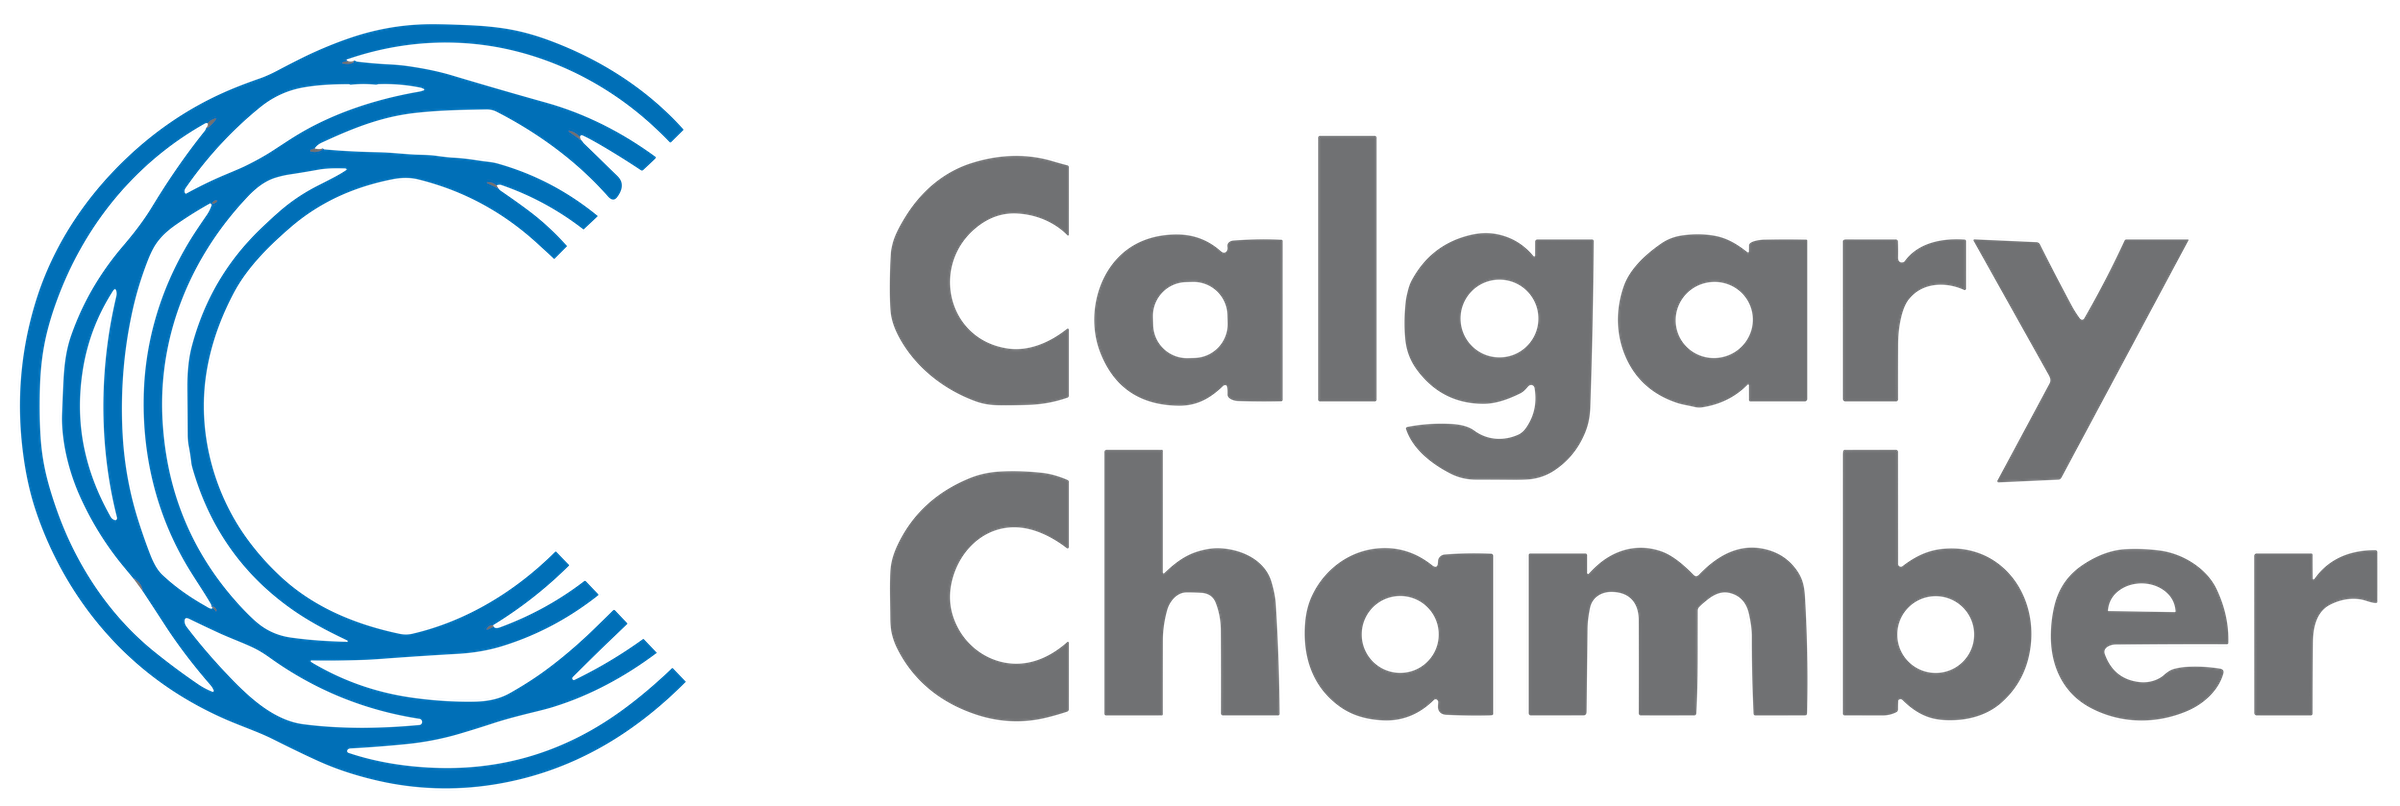 Logo for Calgary Chamber of Commerce on a transparent background